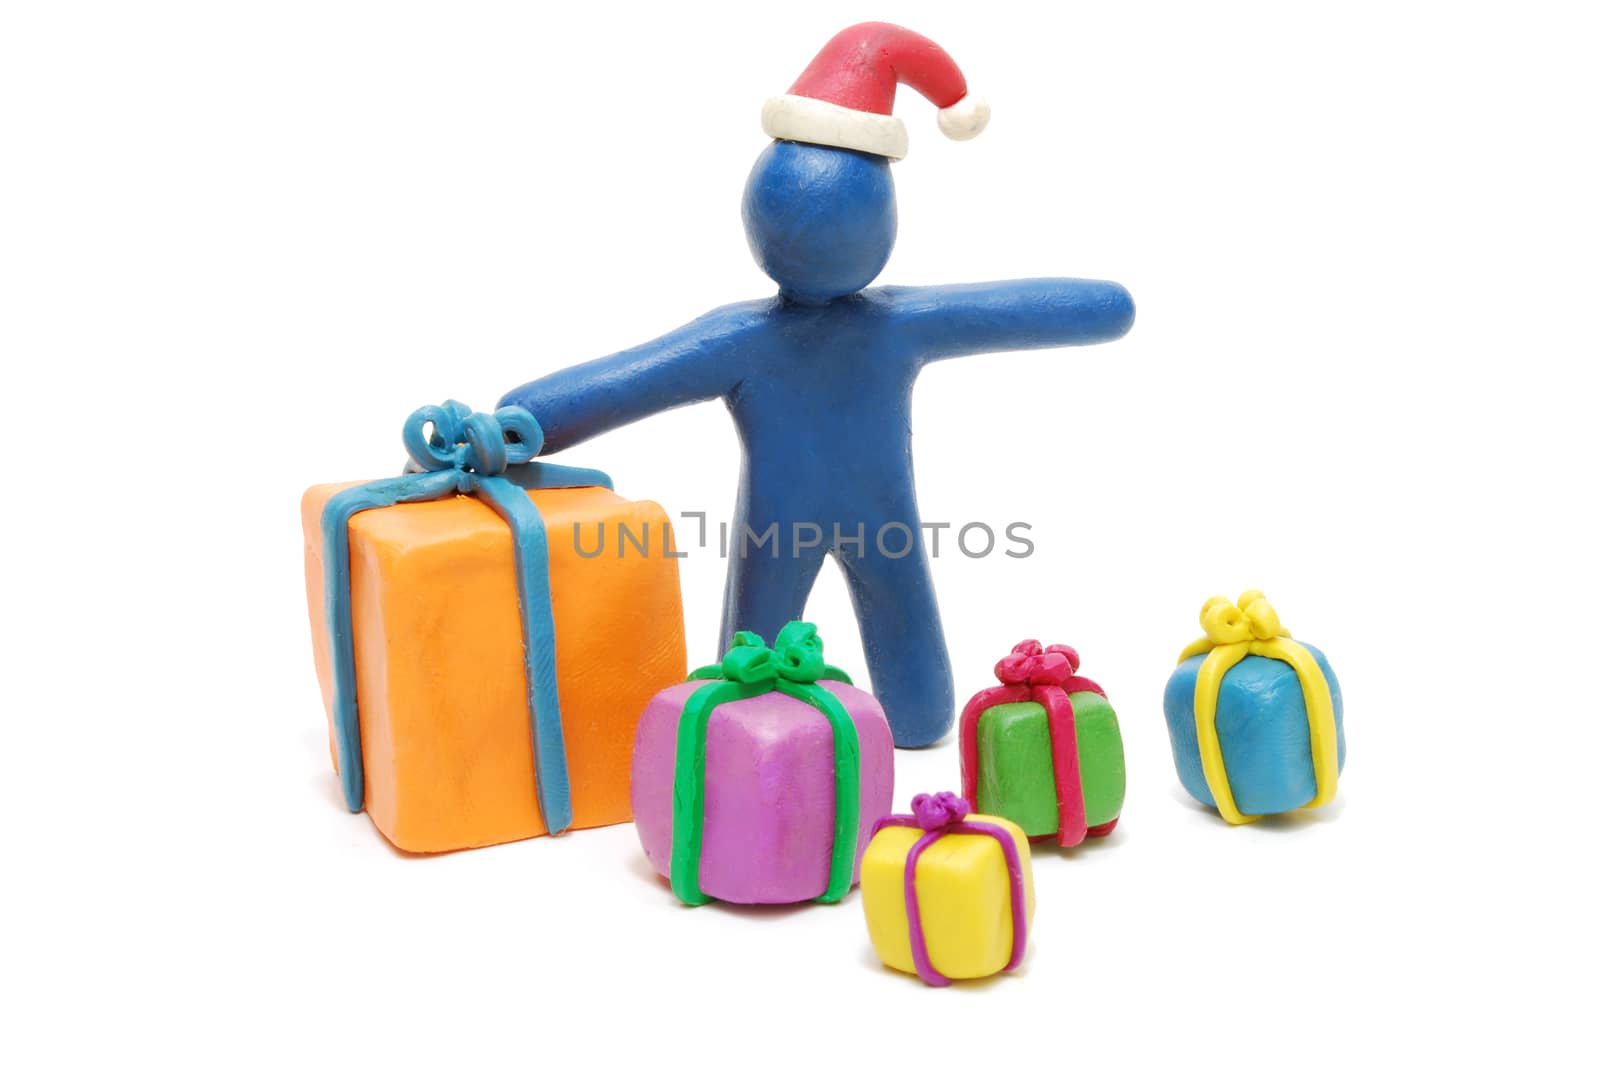 Plasticine Santa Claus with Heap of Various Gift Boxes Isolated on White